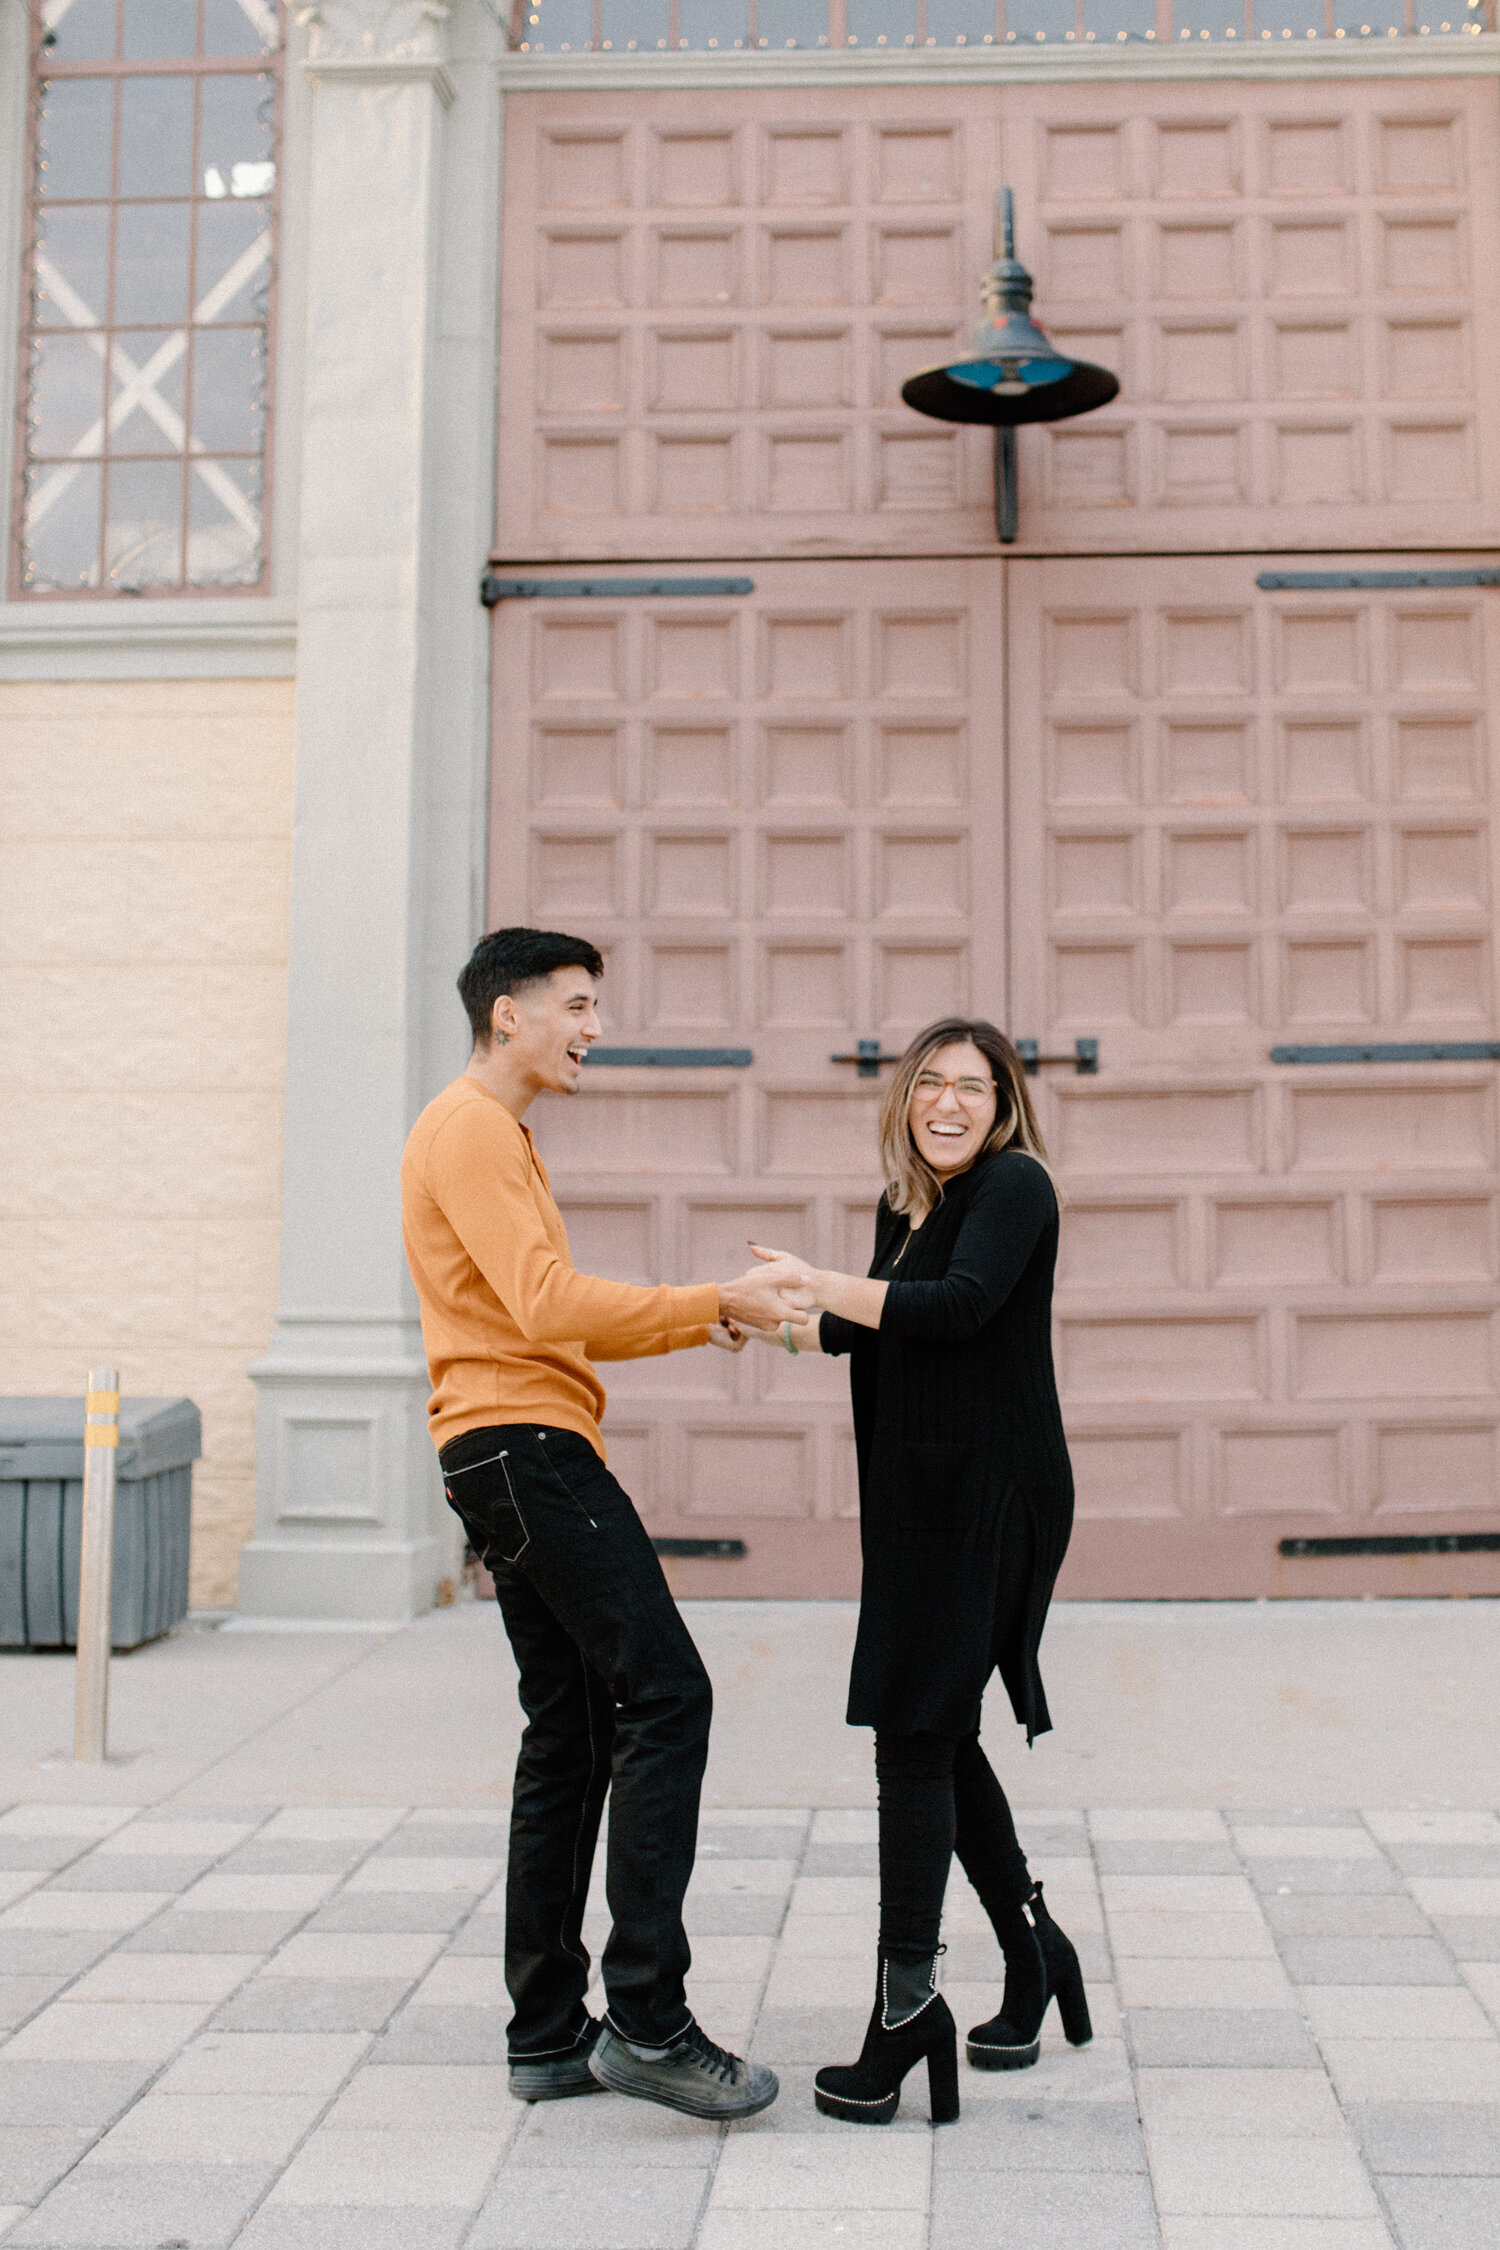  Outside of Ottawa, Canada’s Horticulture Building, Chelsea Mason Photography captures this laughing engaged couple holding hands. womens all black outfit womens ombre medium length shoulder length hair couple holding hands ottawa canada engagement p